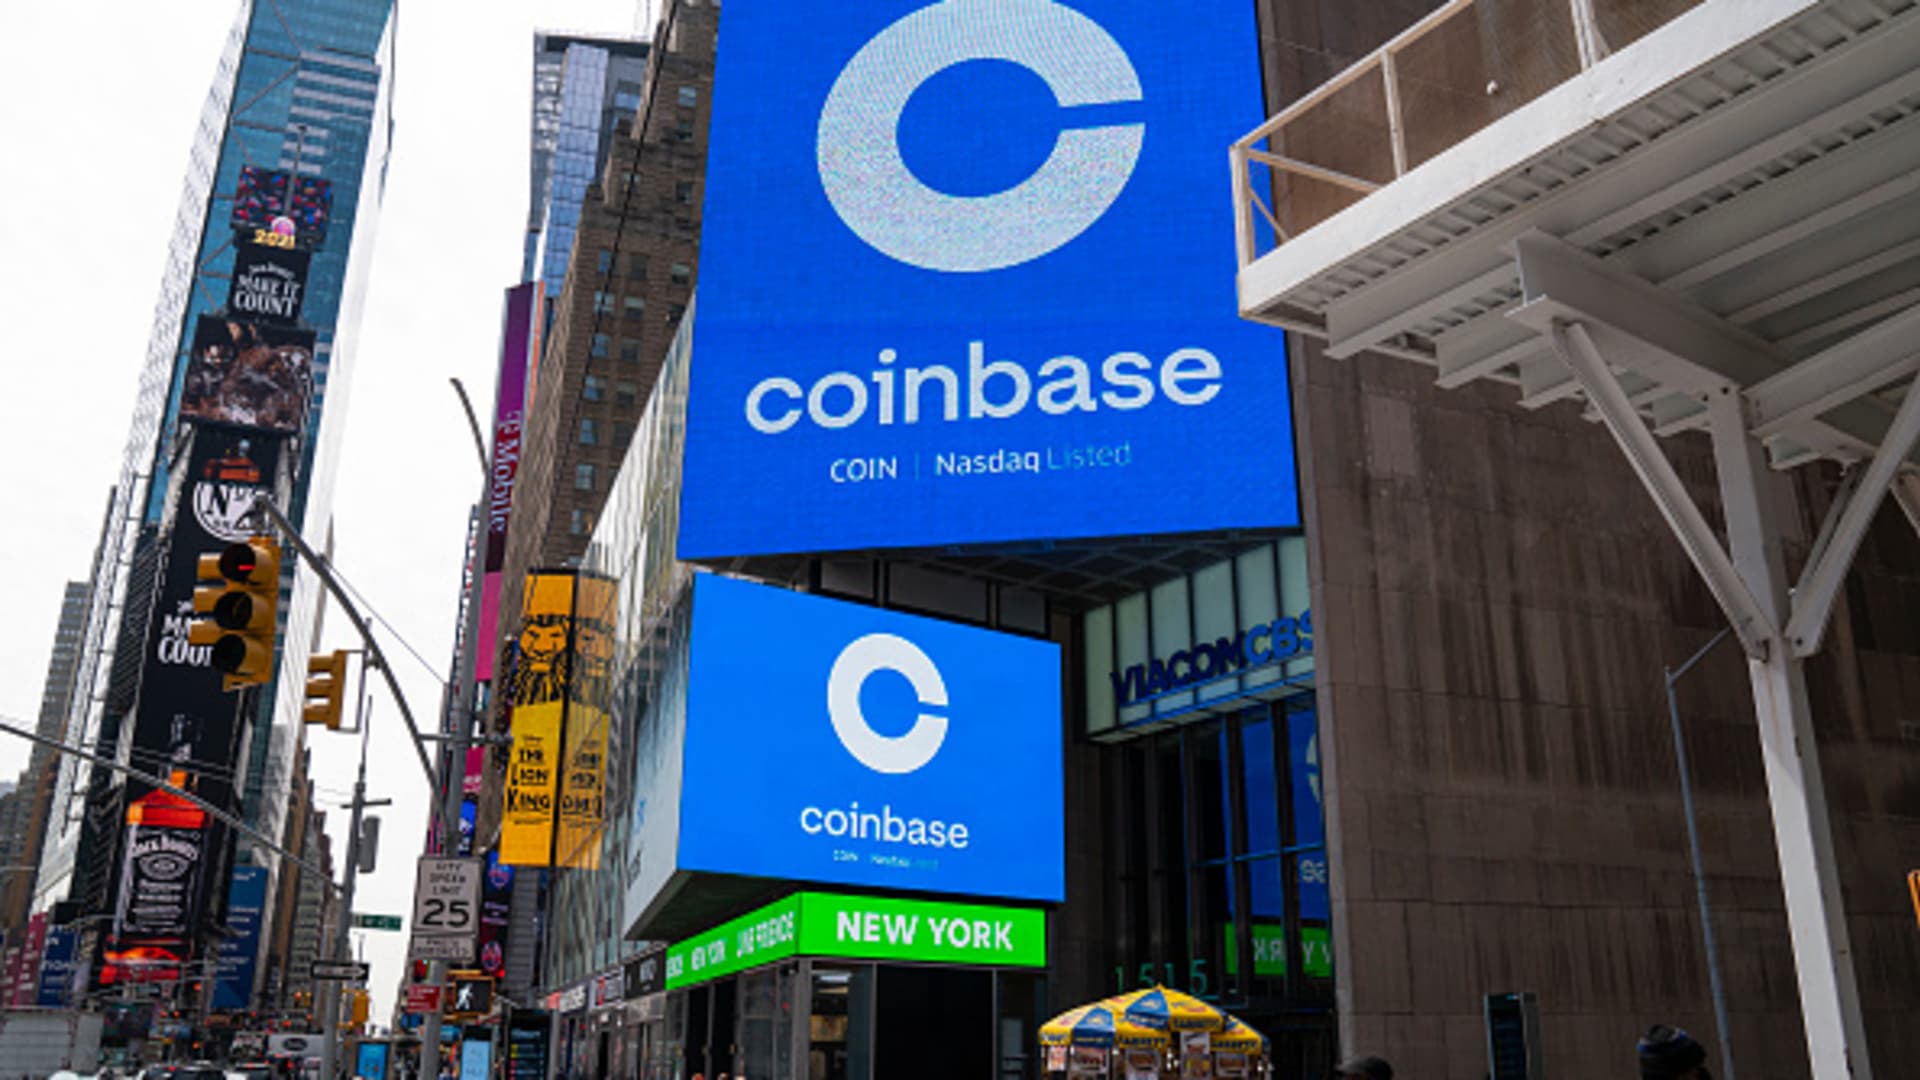 Coinbase signage in New York's Times Square during the company's initial public offering on the Nasdaq on April 14, 2021.